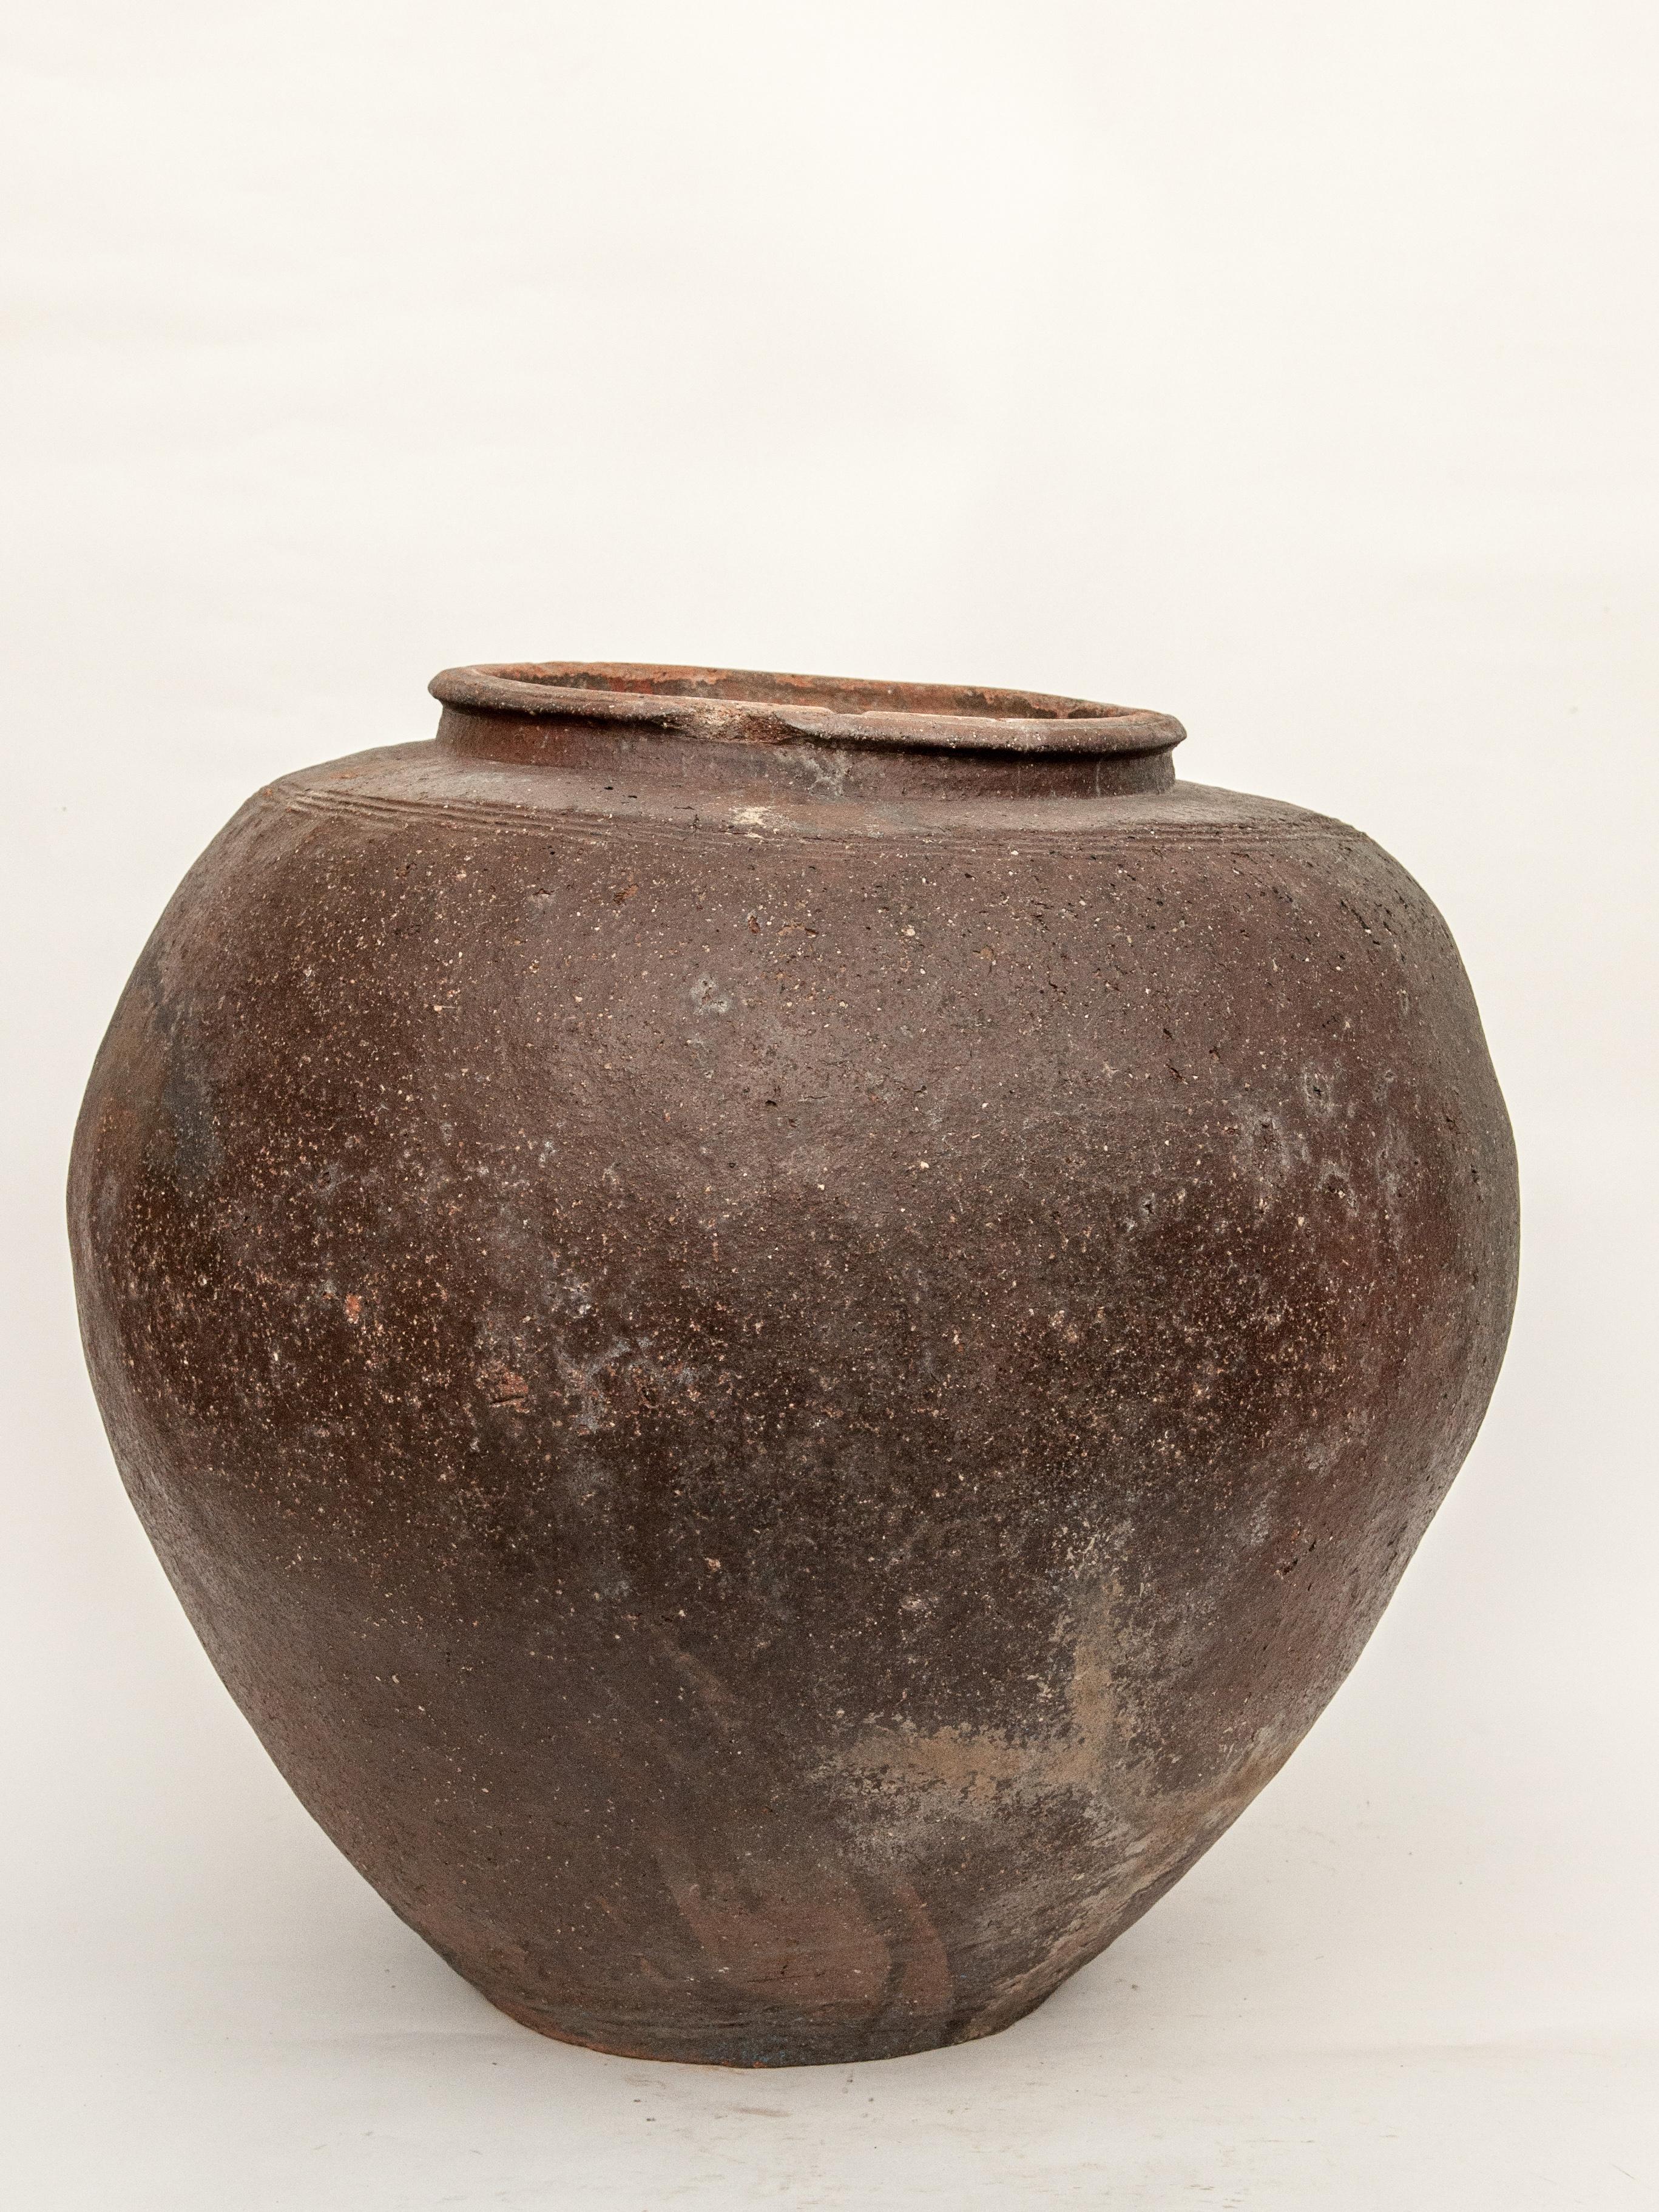 Large vintage storage or water jar from Borneo. Unglazed, mid-20th century. Offered by Bruce Hughes.

Dimensions: 23.5 inch diameter by 22 inches tall.